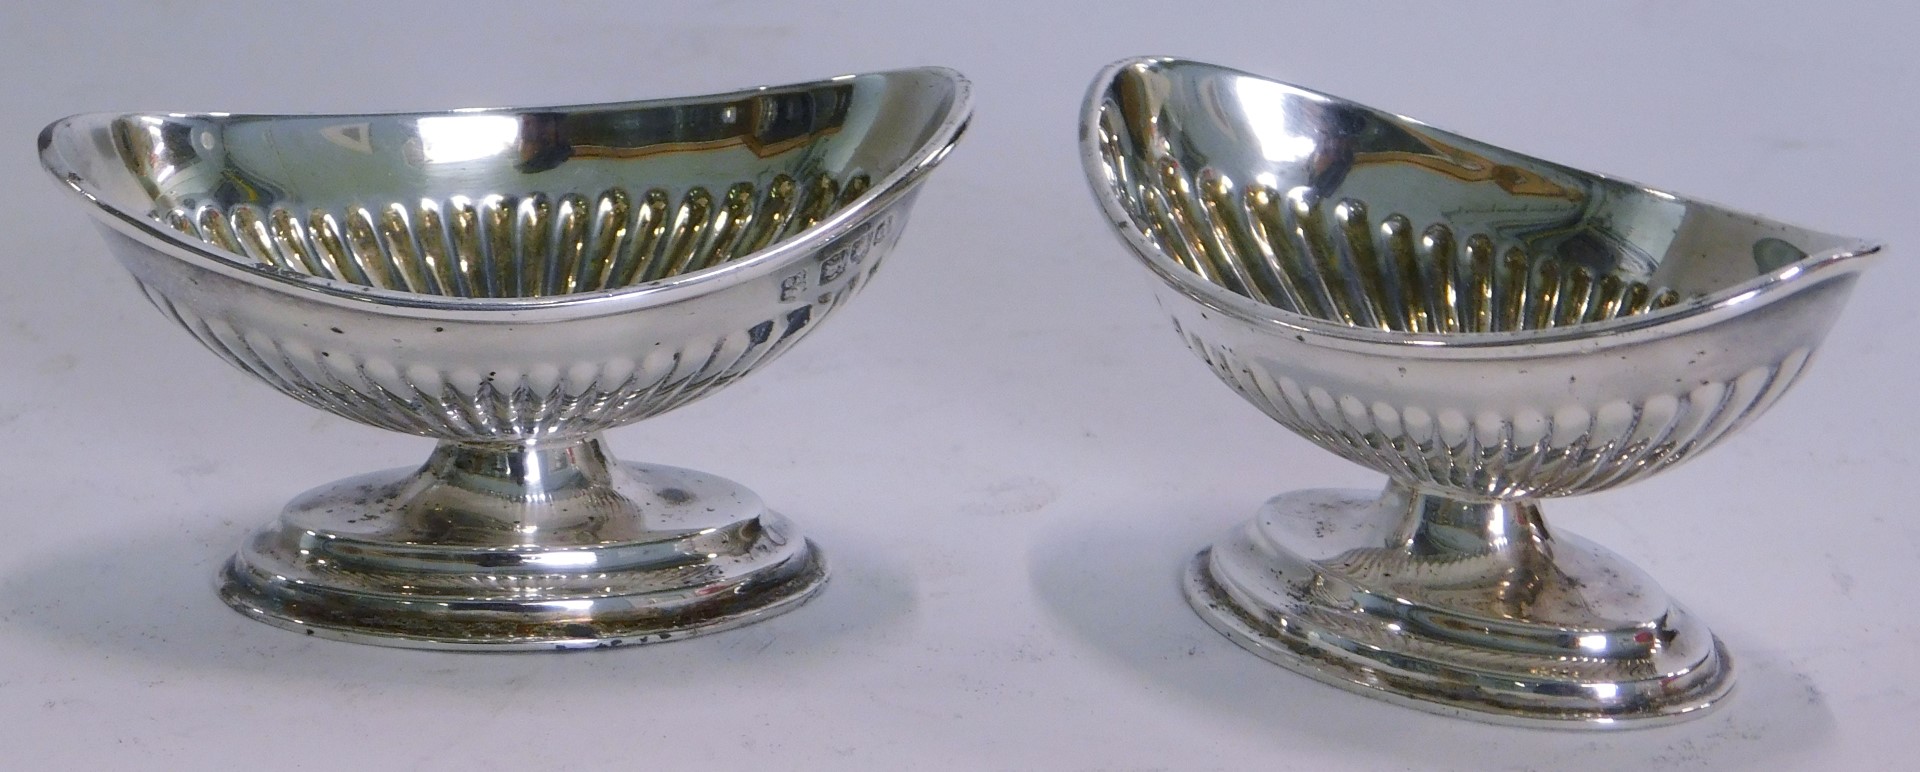 A pair of Victorian Colburn & Co silver salts, each of reeded design on an oval foot, London 1899, 2 - Image 2 of 2